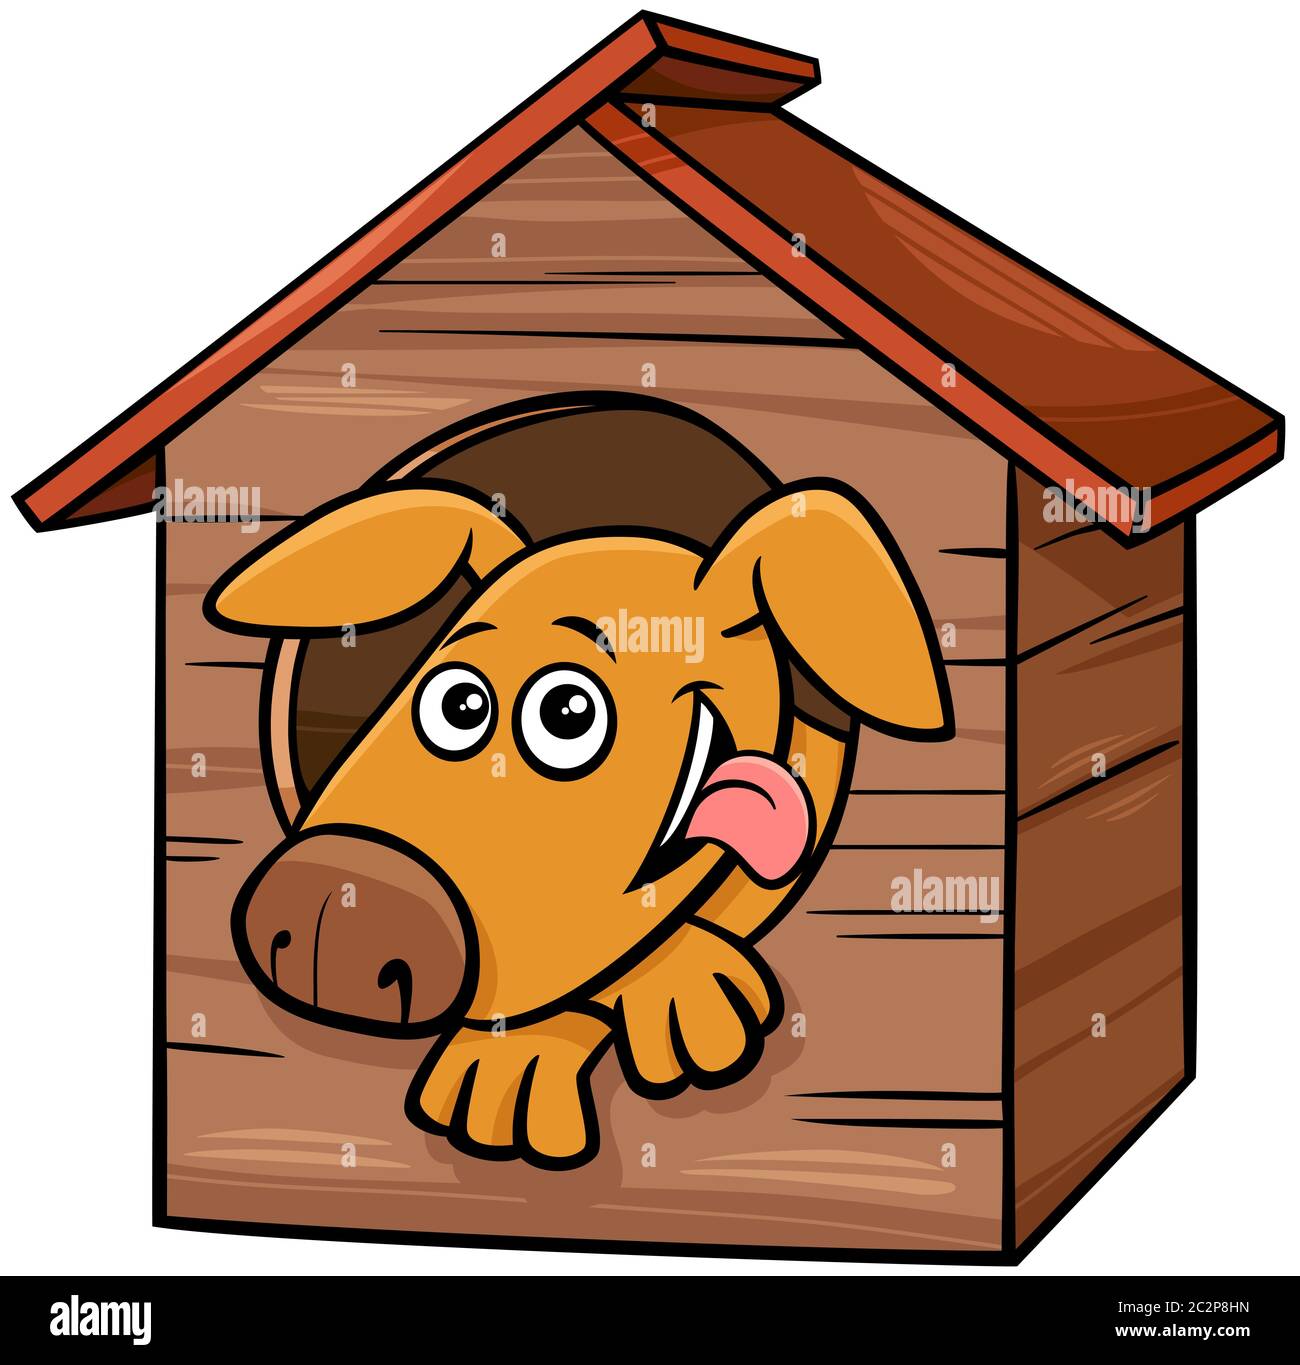 cartoon dog animal character in doghouse Stock Photo - Alamy